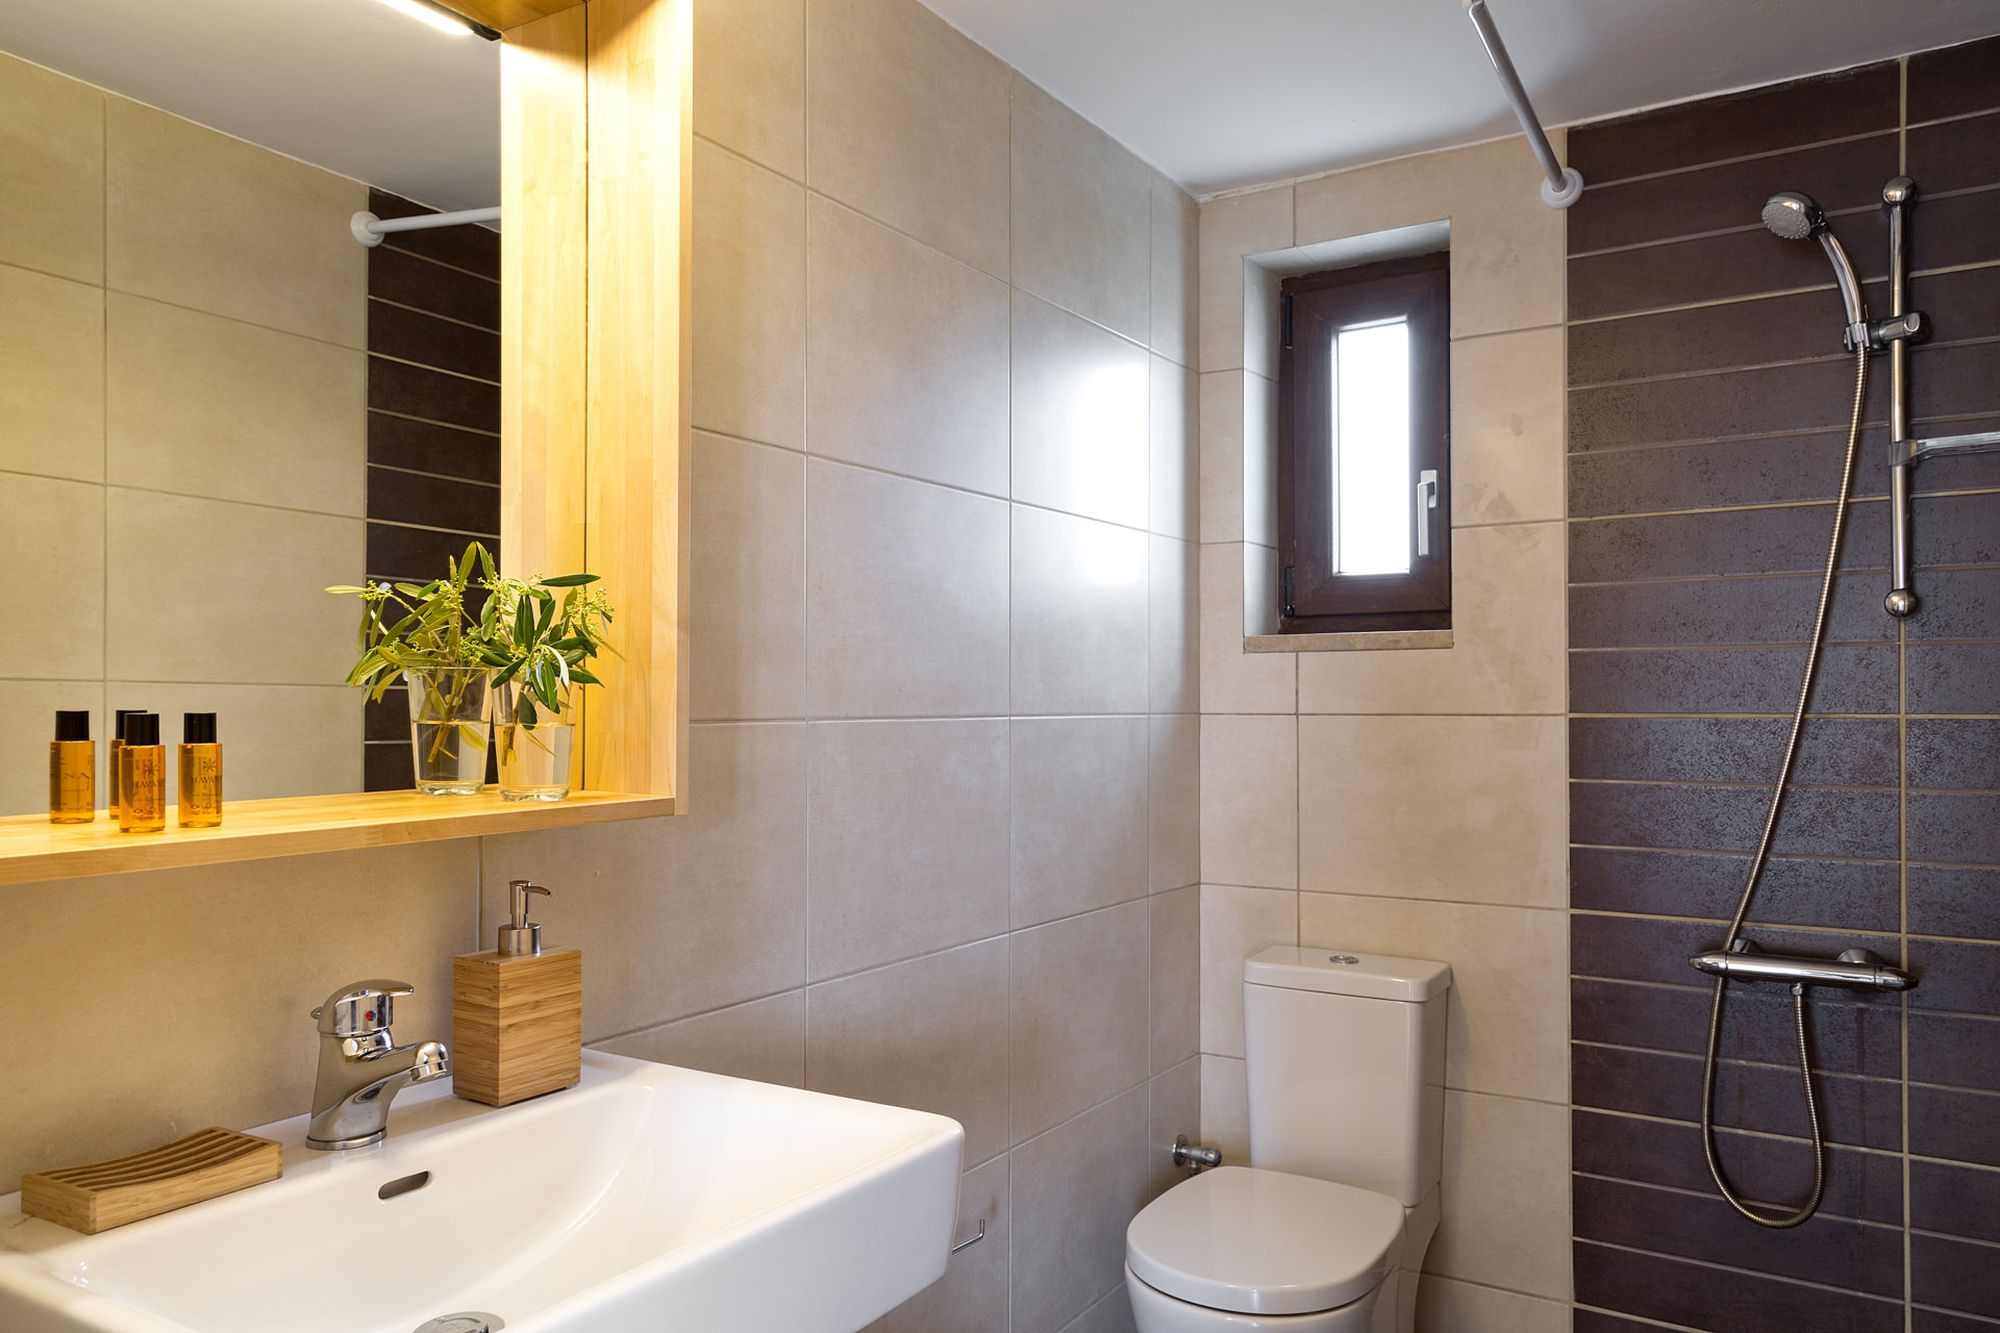 Modern bathroom with shower, a big white washbasin, a big wooden mirror and tiles in beige and gray tones.